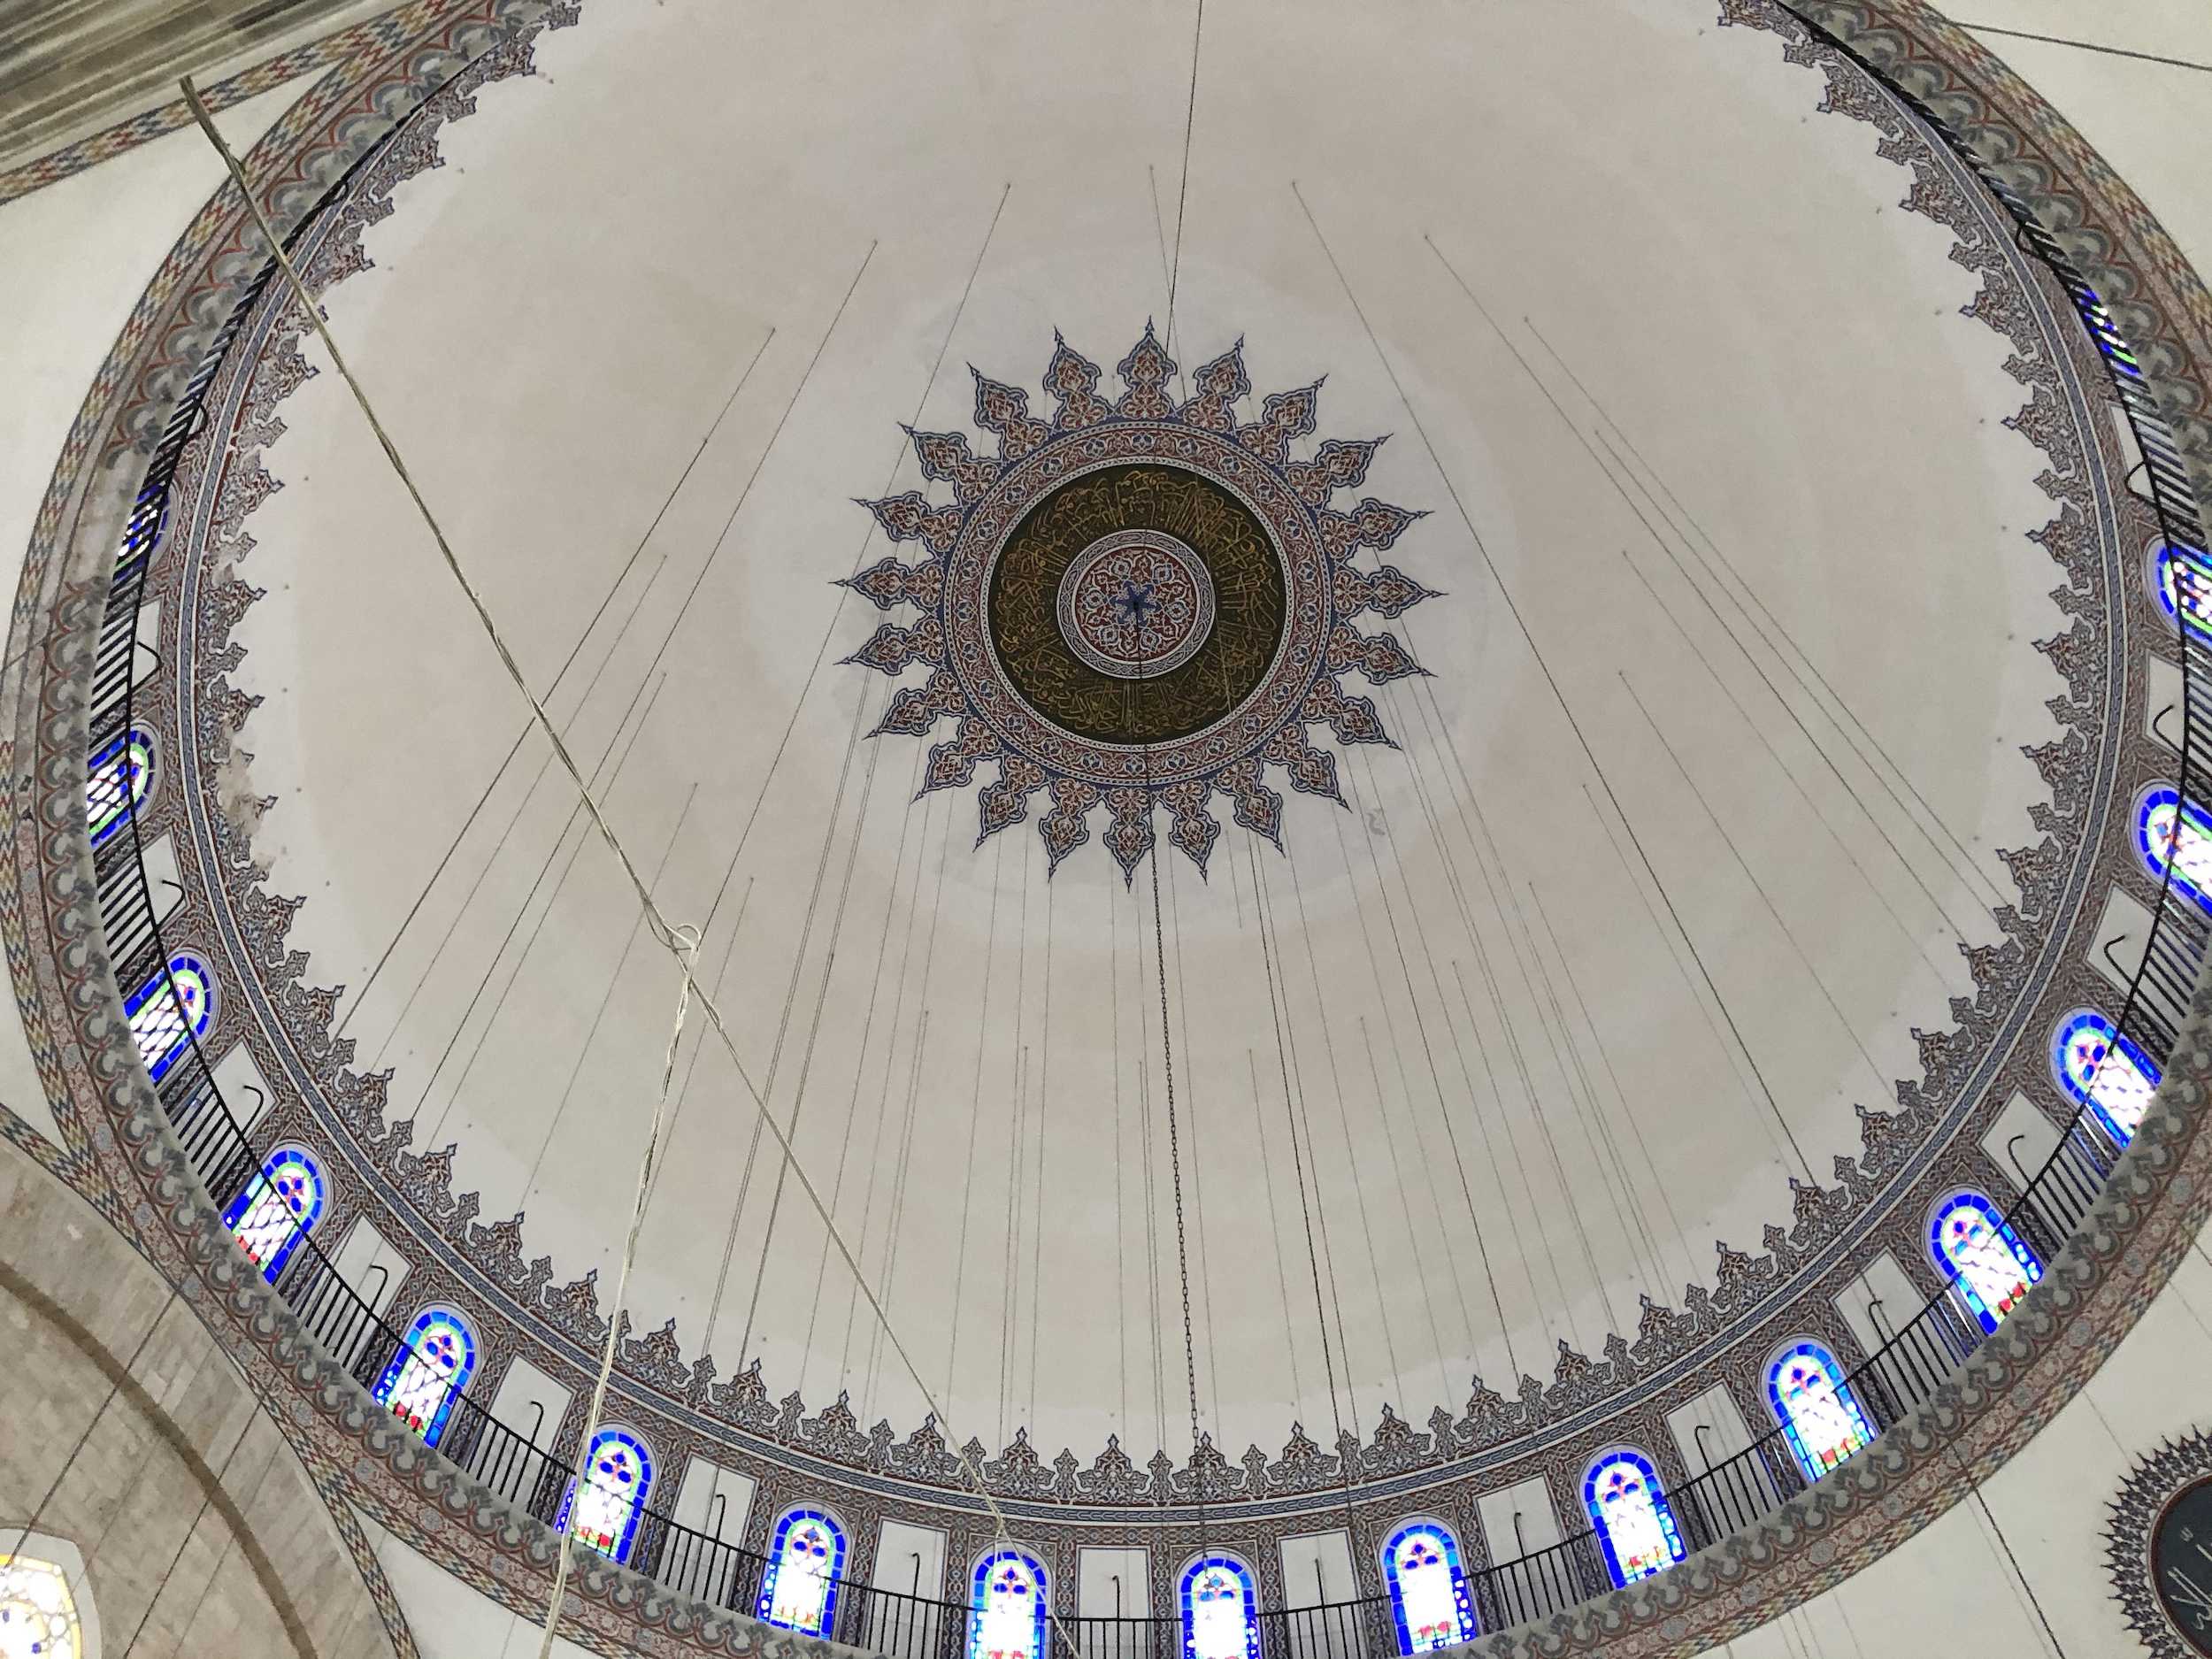 Dome at the Yavuz Selim Mosque in Istanbul, Turkey